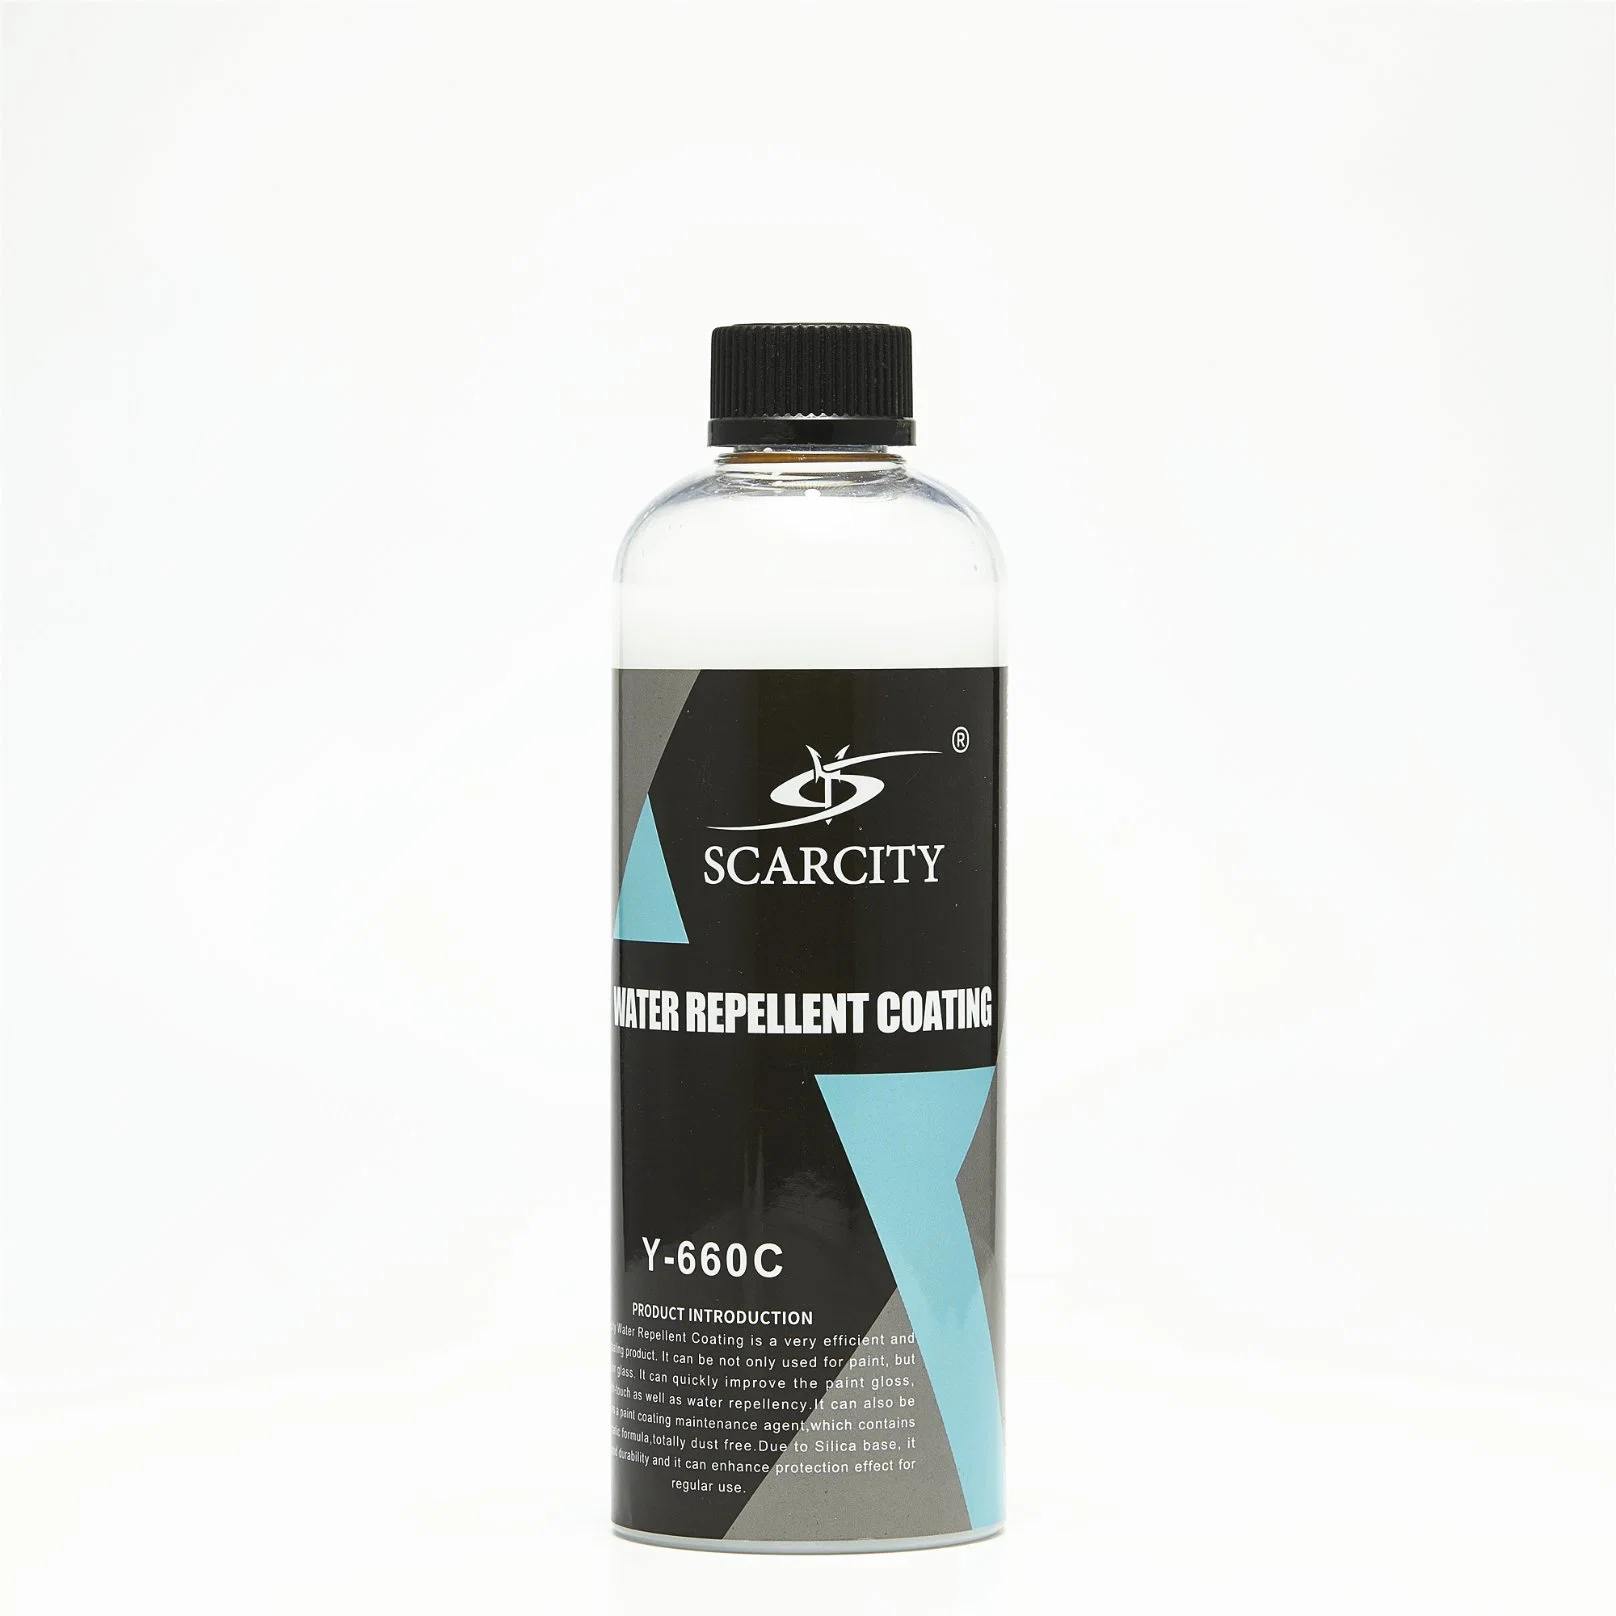 Super Hydrophobic and Water-Repellent Spray Coating for Car, Boat, Motorcycle